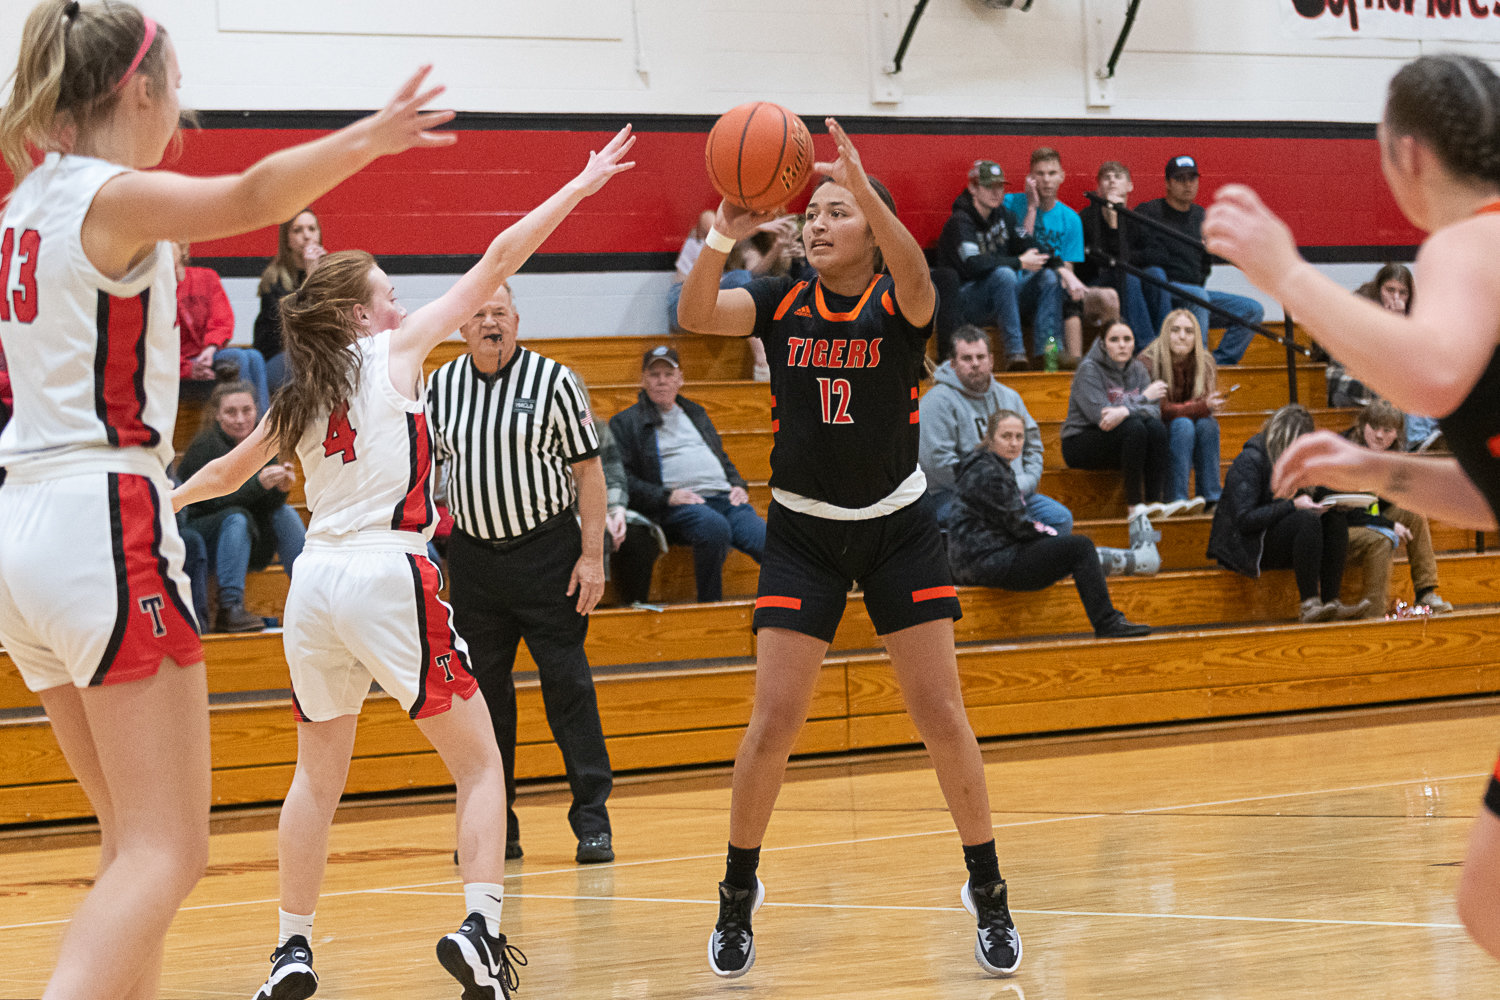 Centralia's Makayla Chavez pulls up from long range during the Tigers' 56-16 win over Tenino on Dec. 1.